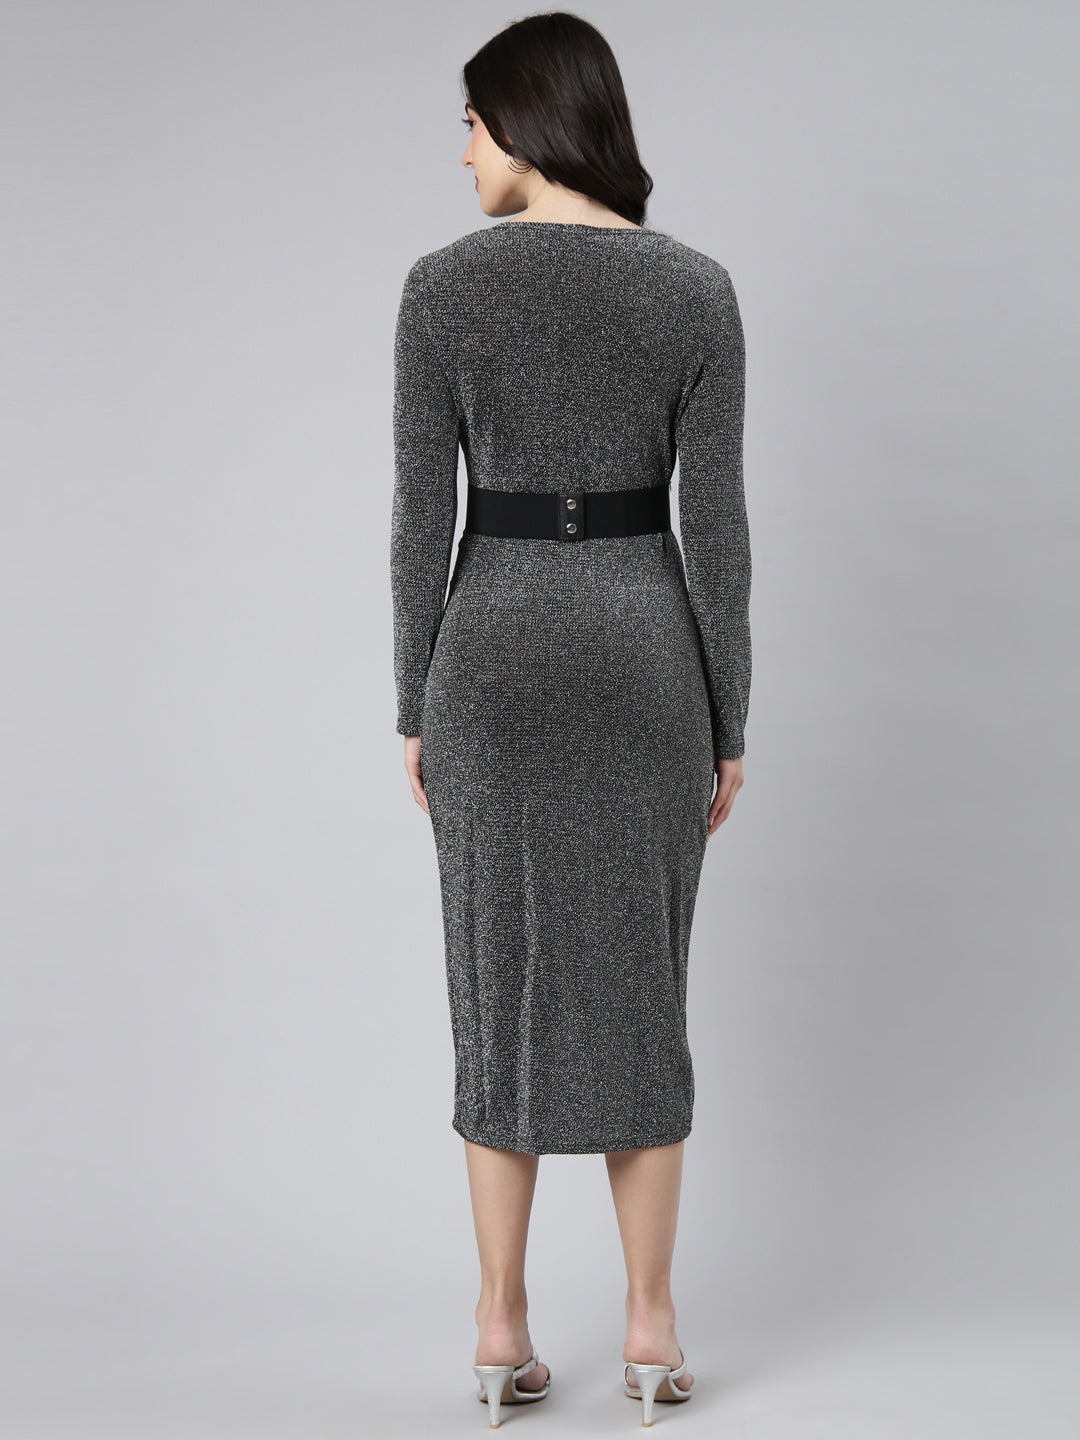 Women Solid Grey Sheath Dress comes with Belt